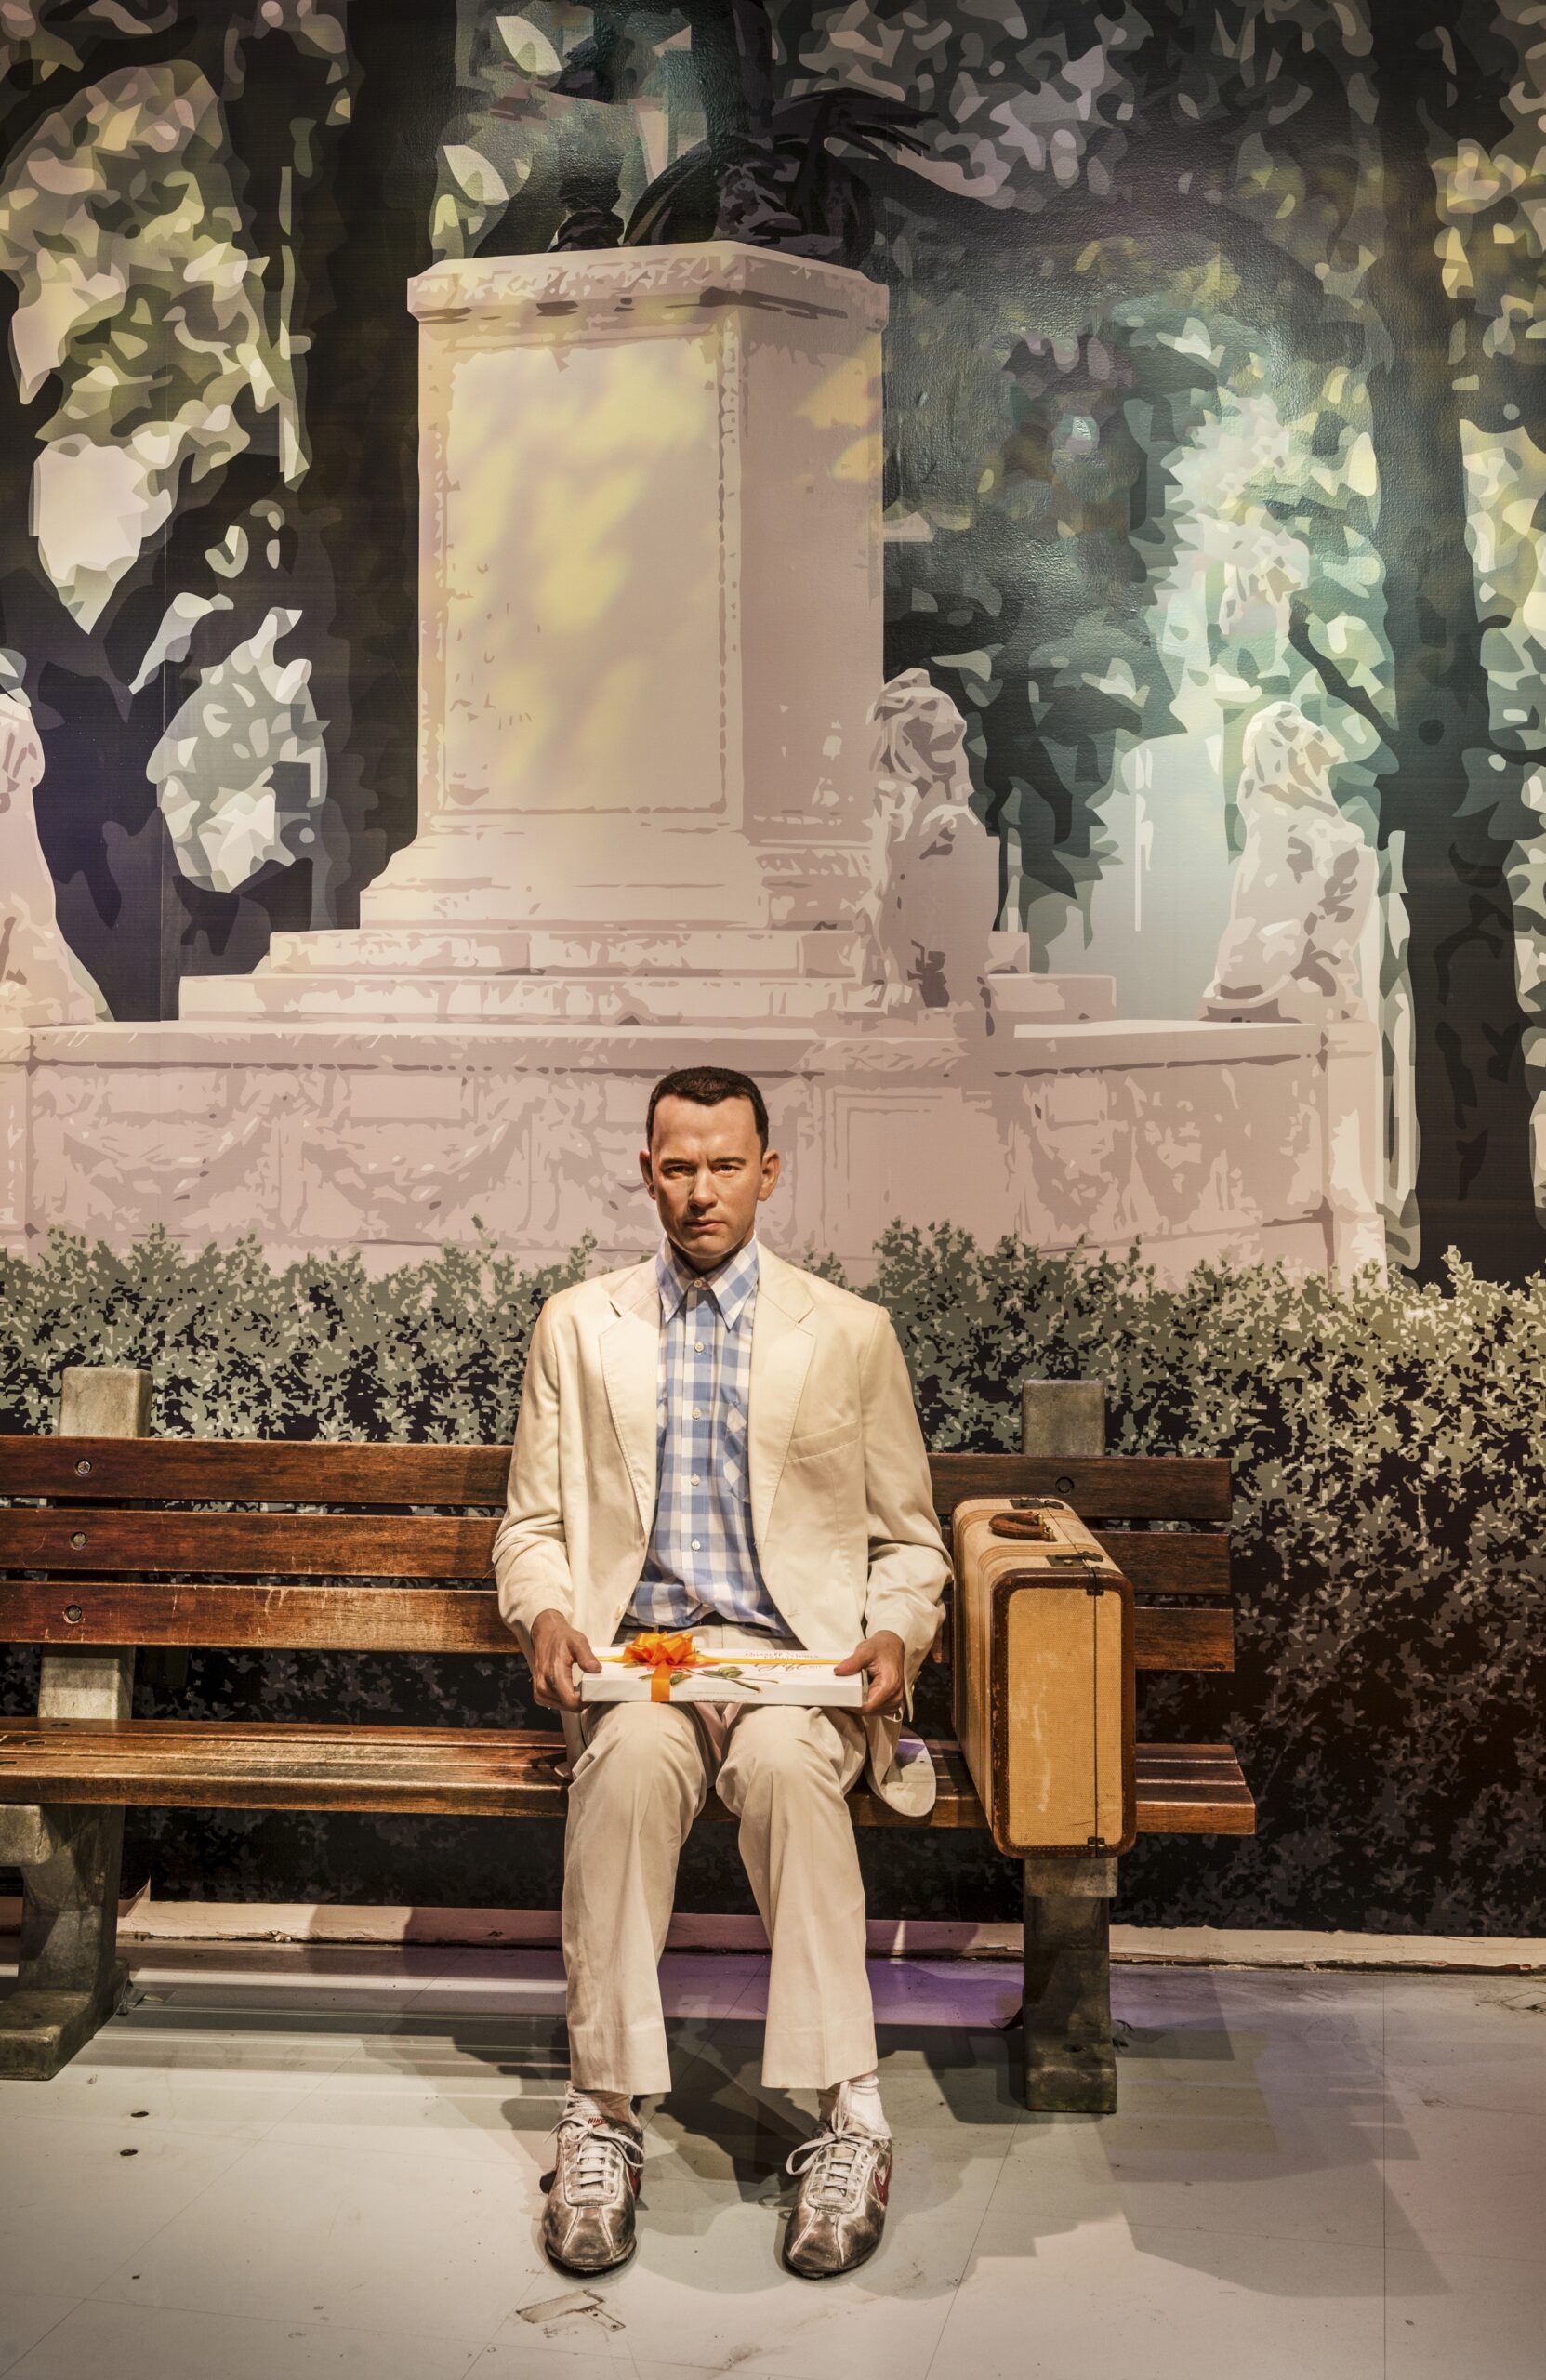 Wax model of Forrest Gump sitting on a bench